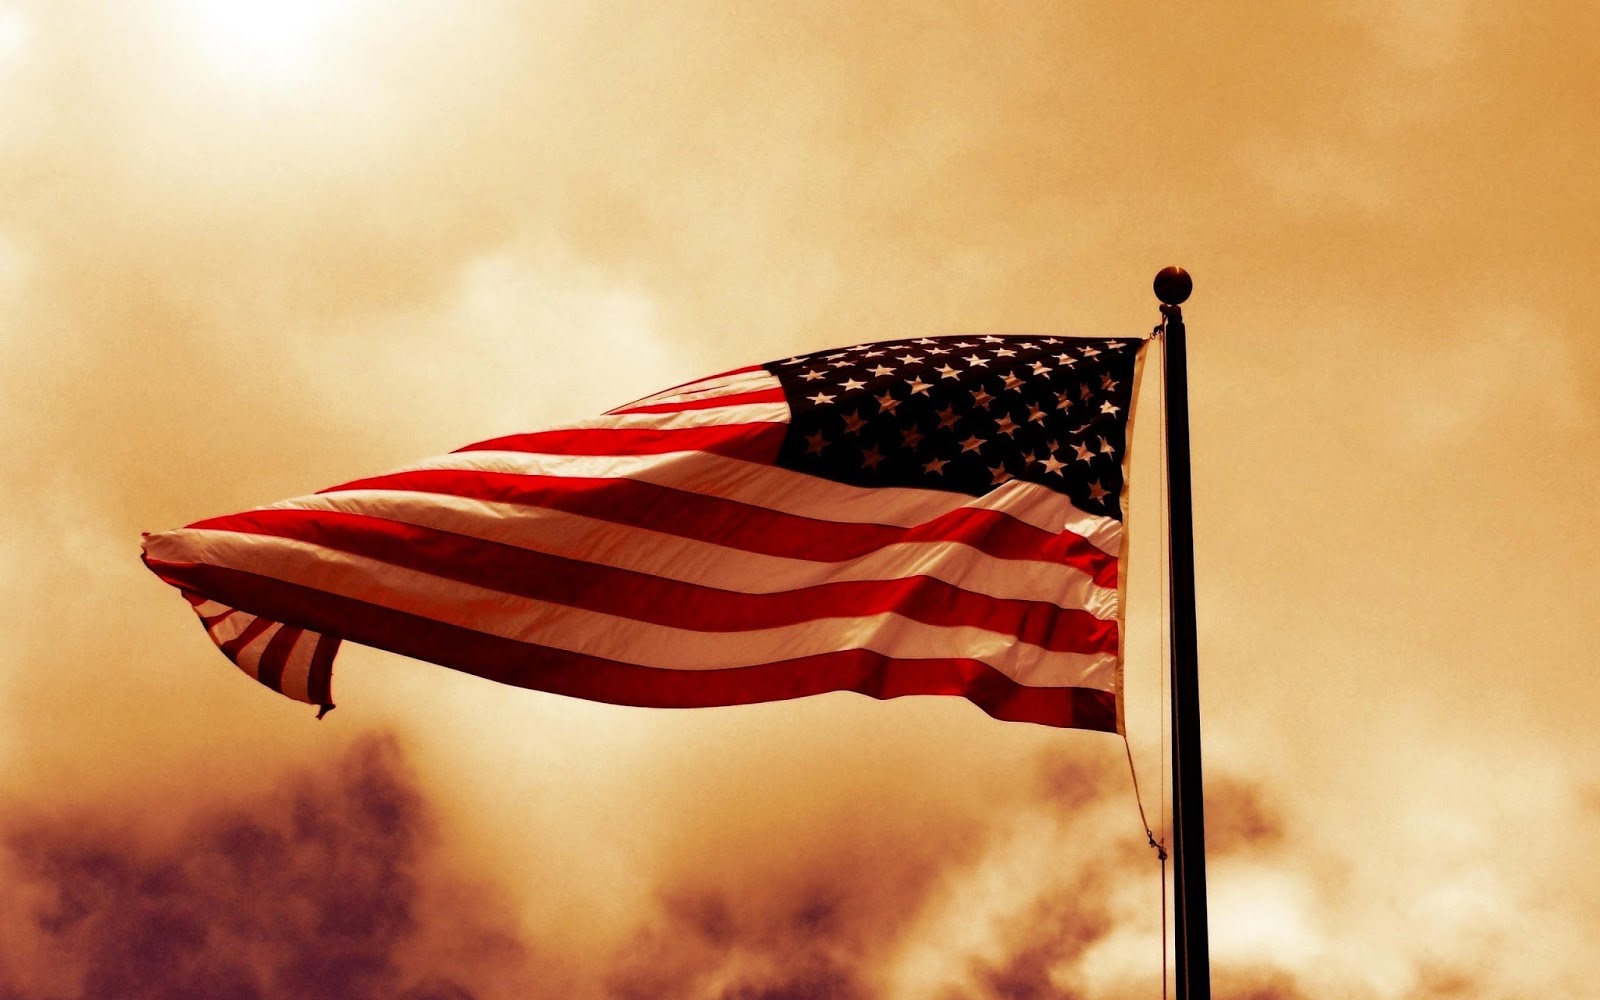  american flag hd wallpaper old american flag with black background 1600x1000